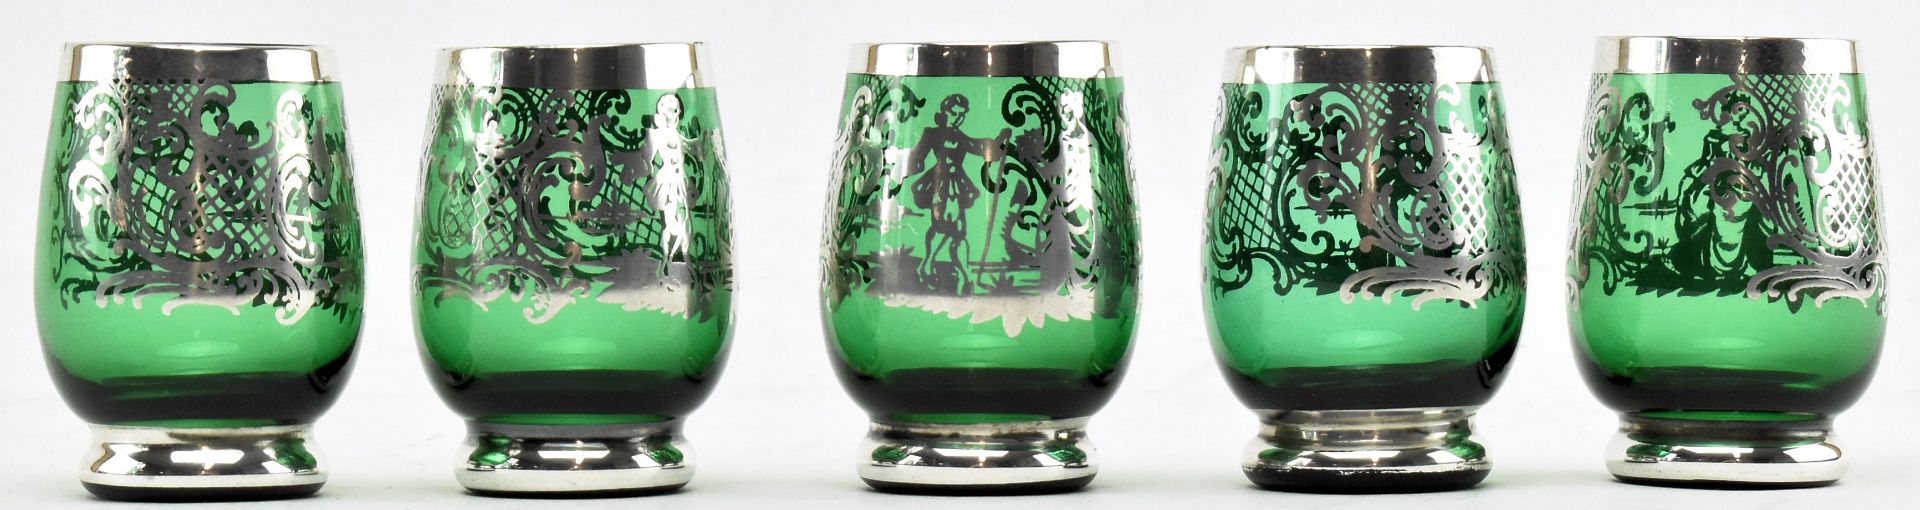 SET OF VENETIAN SILVERED EMERALD GLASS DECANTER & 6 GLASSES - Image 3 of 5